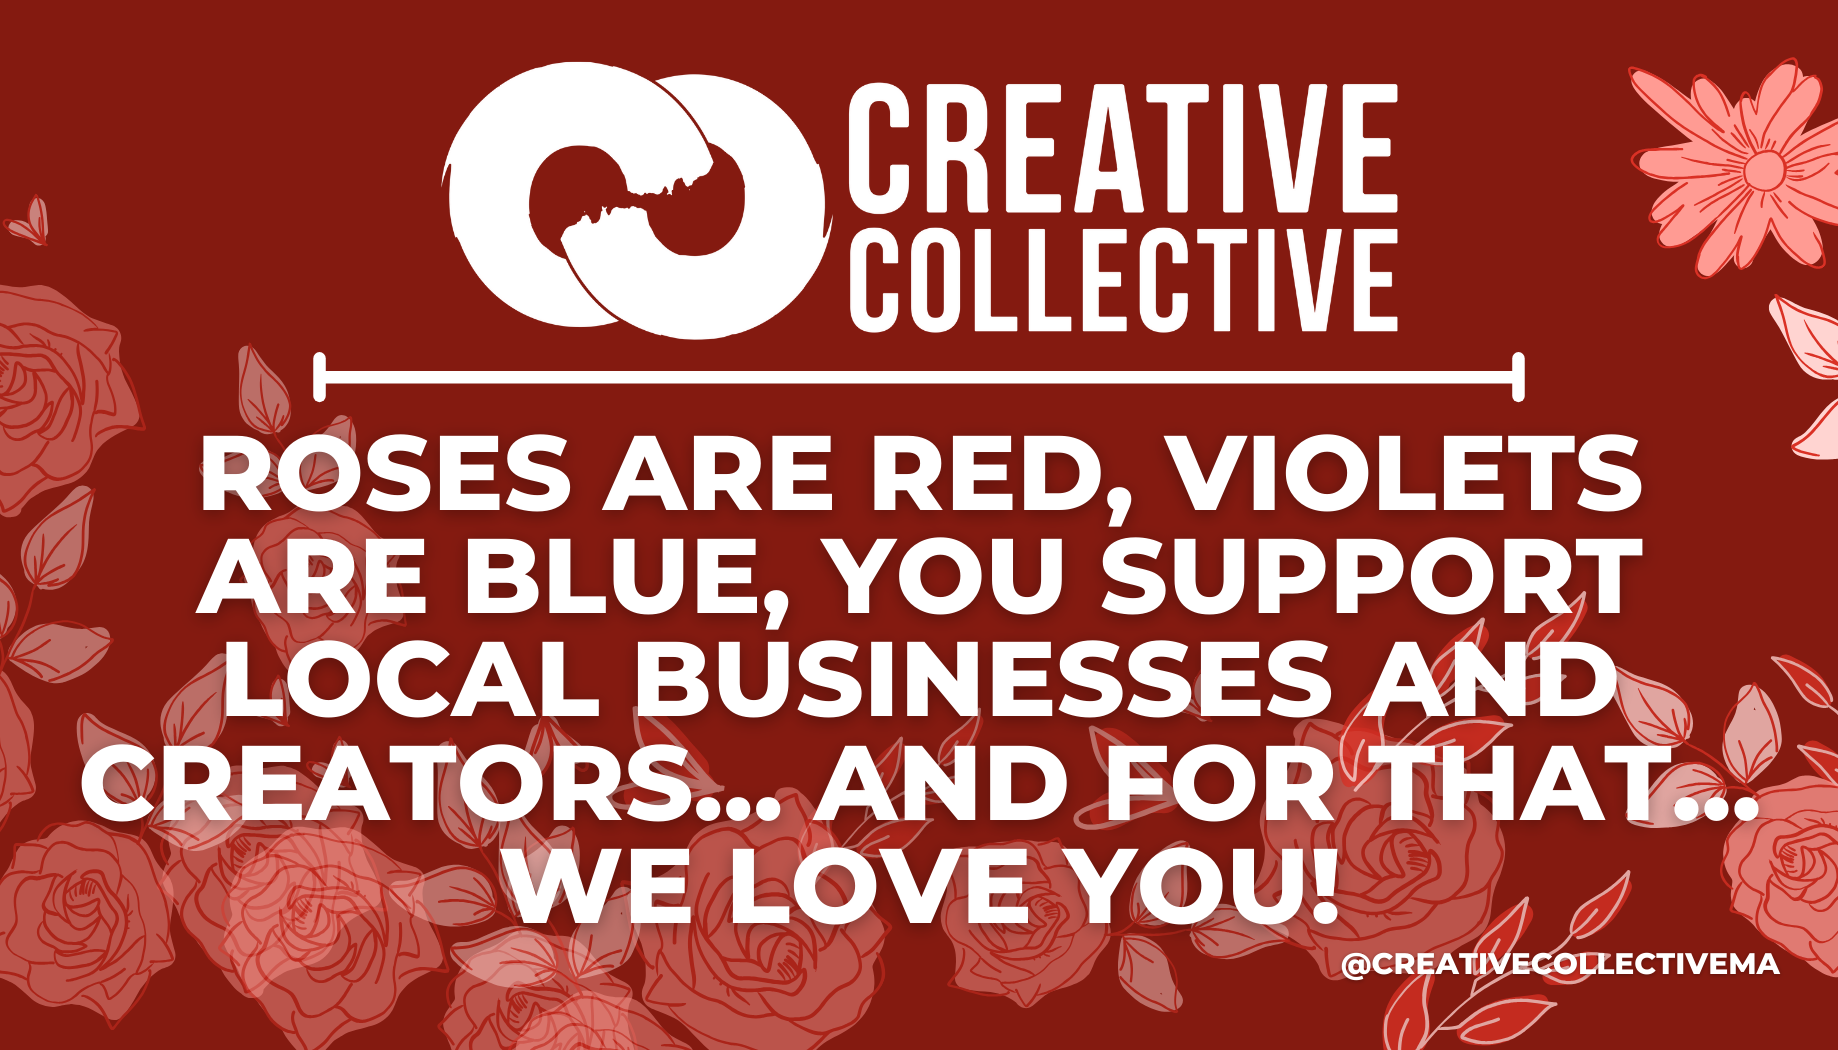 As an SEO marketing expert, I'll express it this way: By choosing Roses Red and Blue, you're directly supporting our treasured local businesses and talented creators. Let's celebrate creativity together.